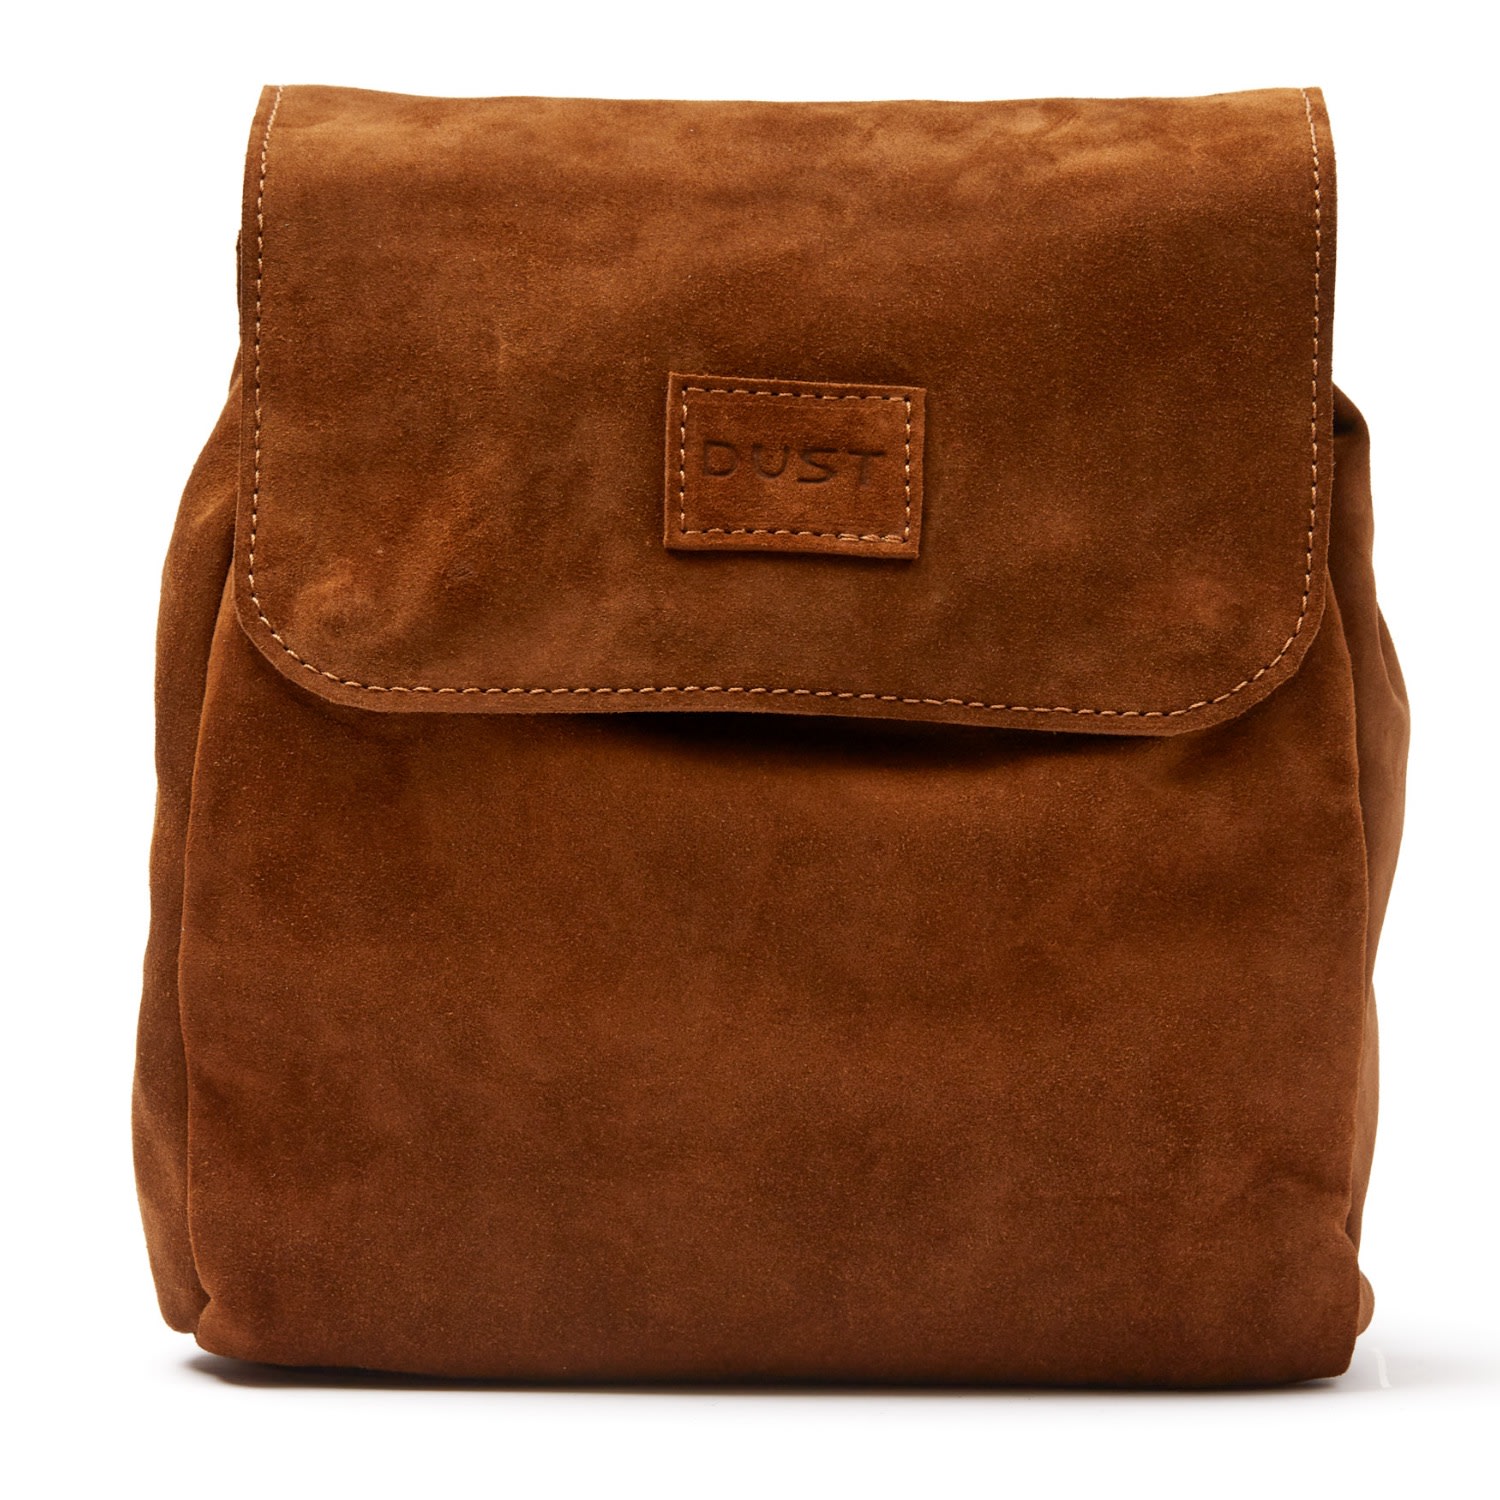 The Dust Company Women's Leather Backpack Brown Upper West Side Collection